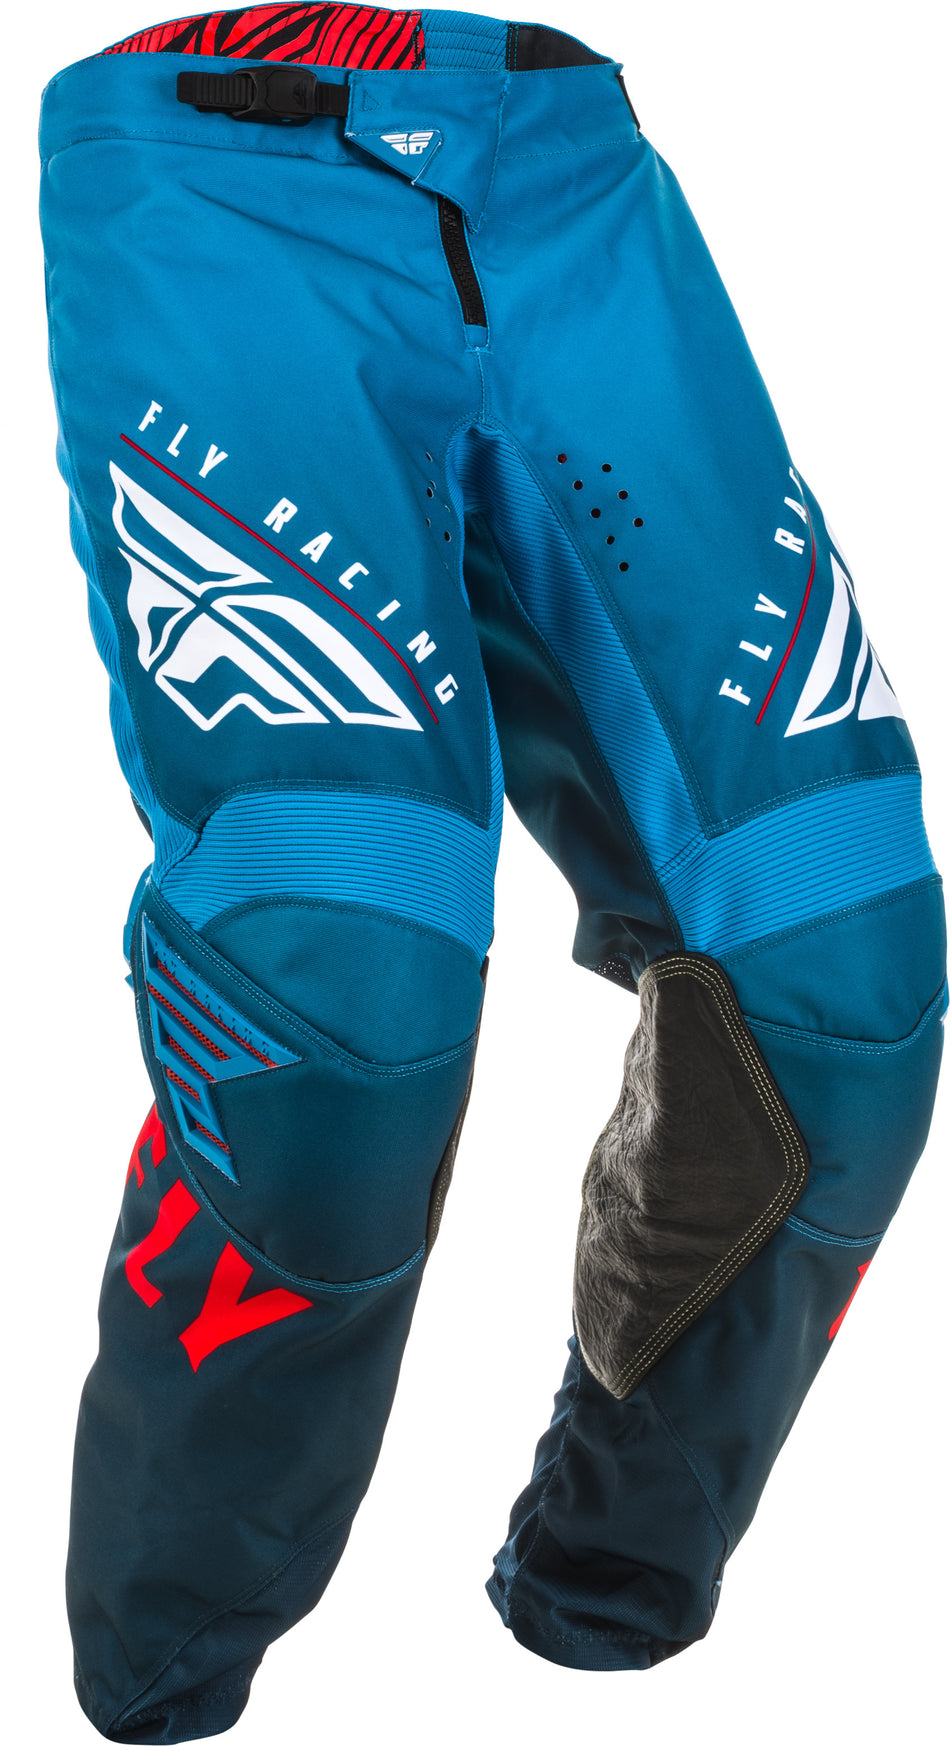 FLY RACING Kinetic K220 Pants Blue/White/Red Sz 28 373-53128